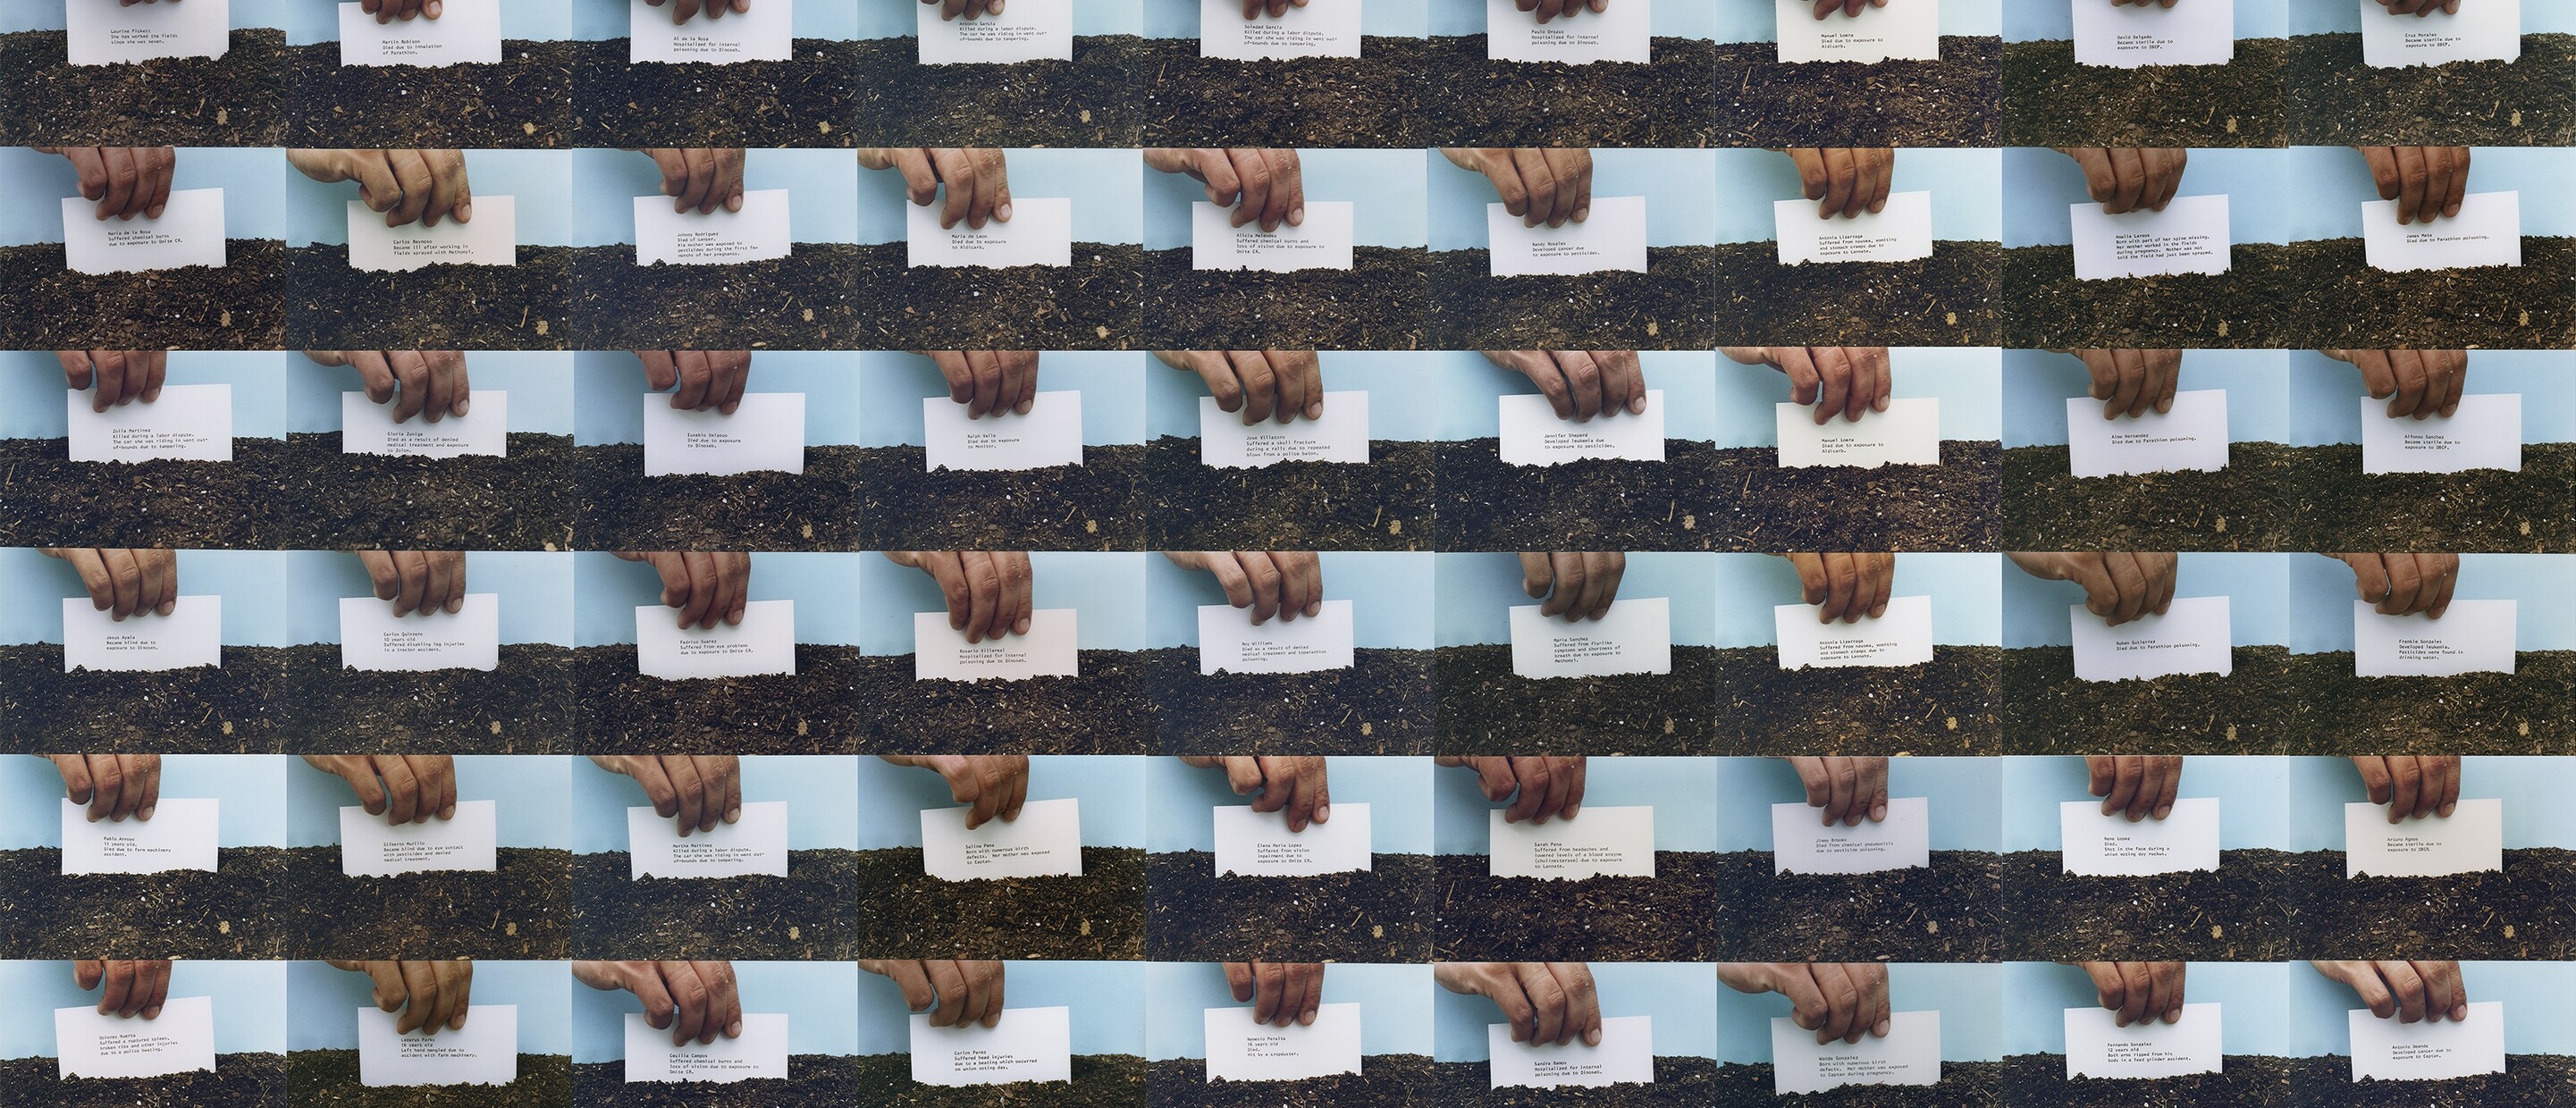 repetition of the same image creating a pattern